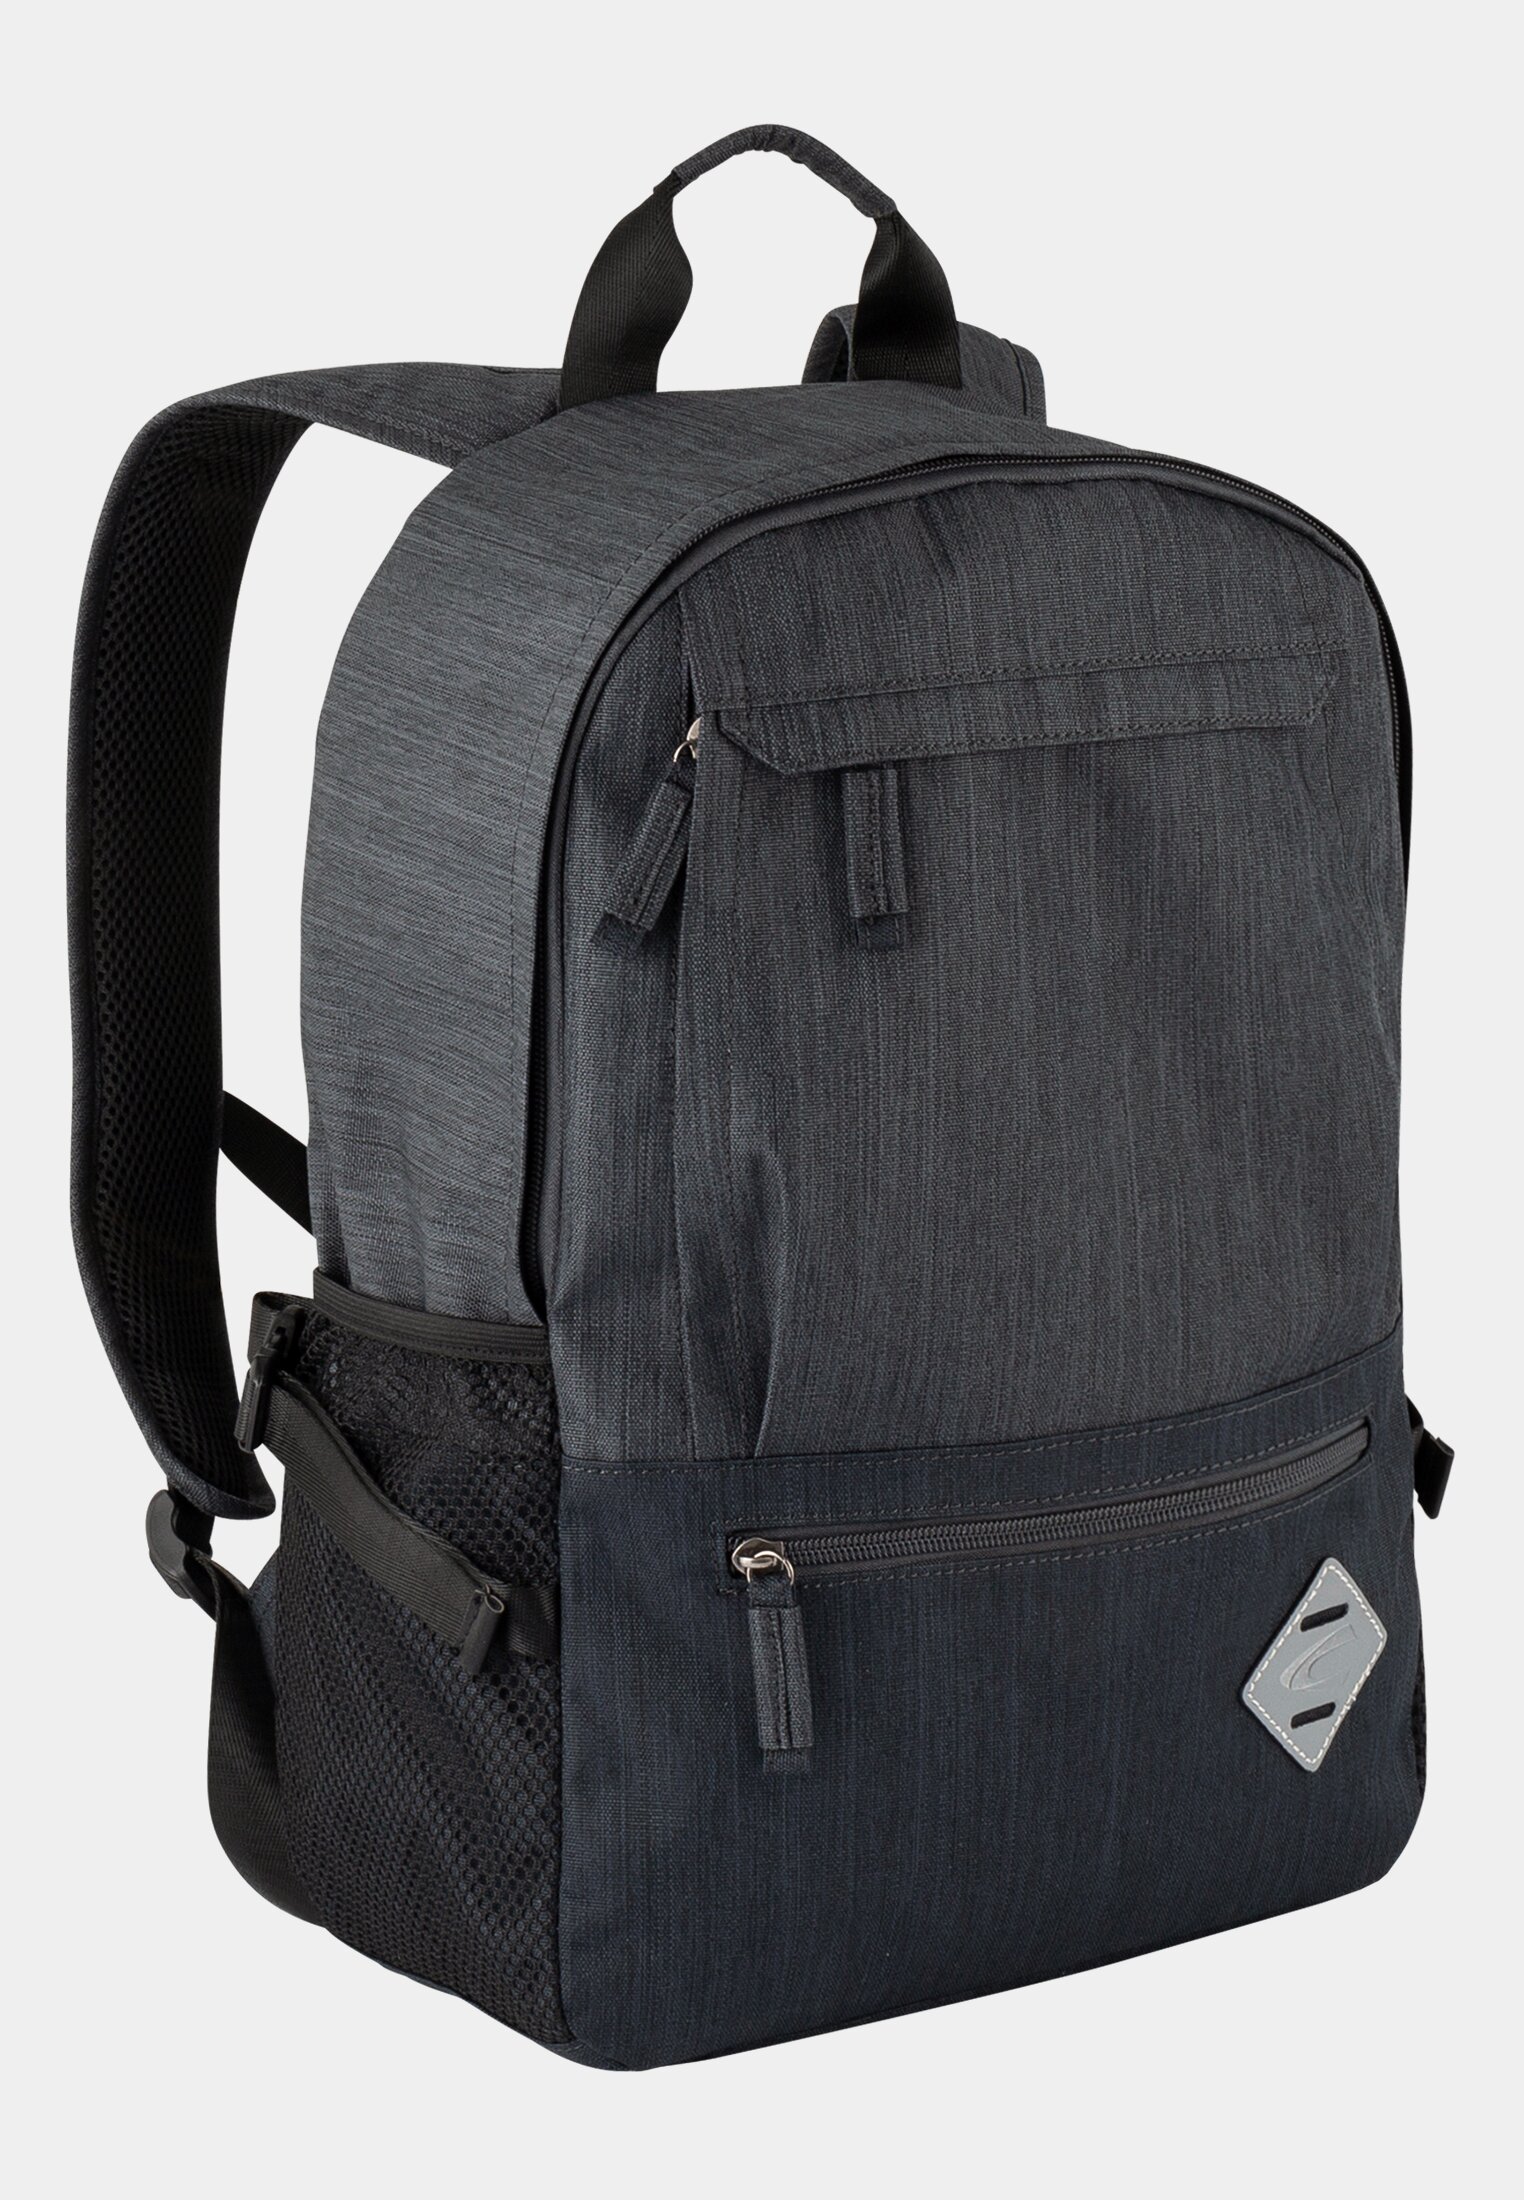 Camel Active Backpack made from durable nylon